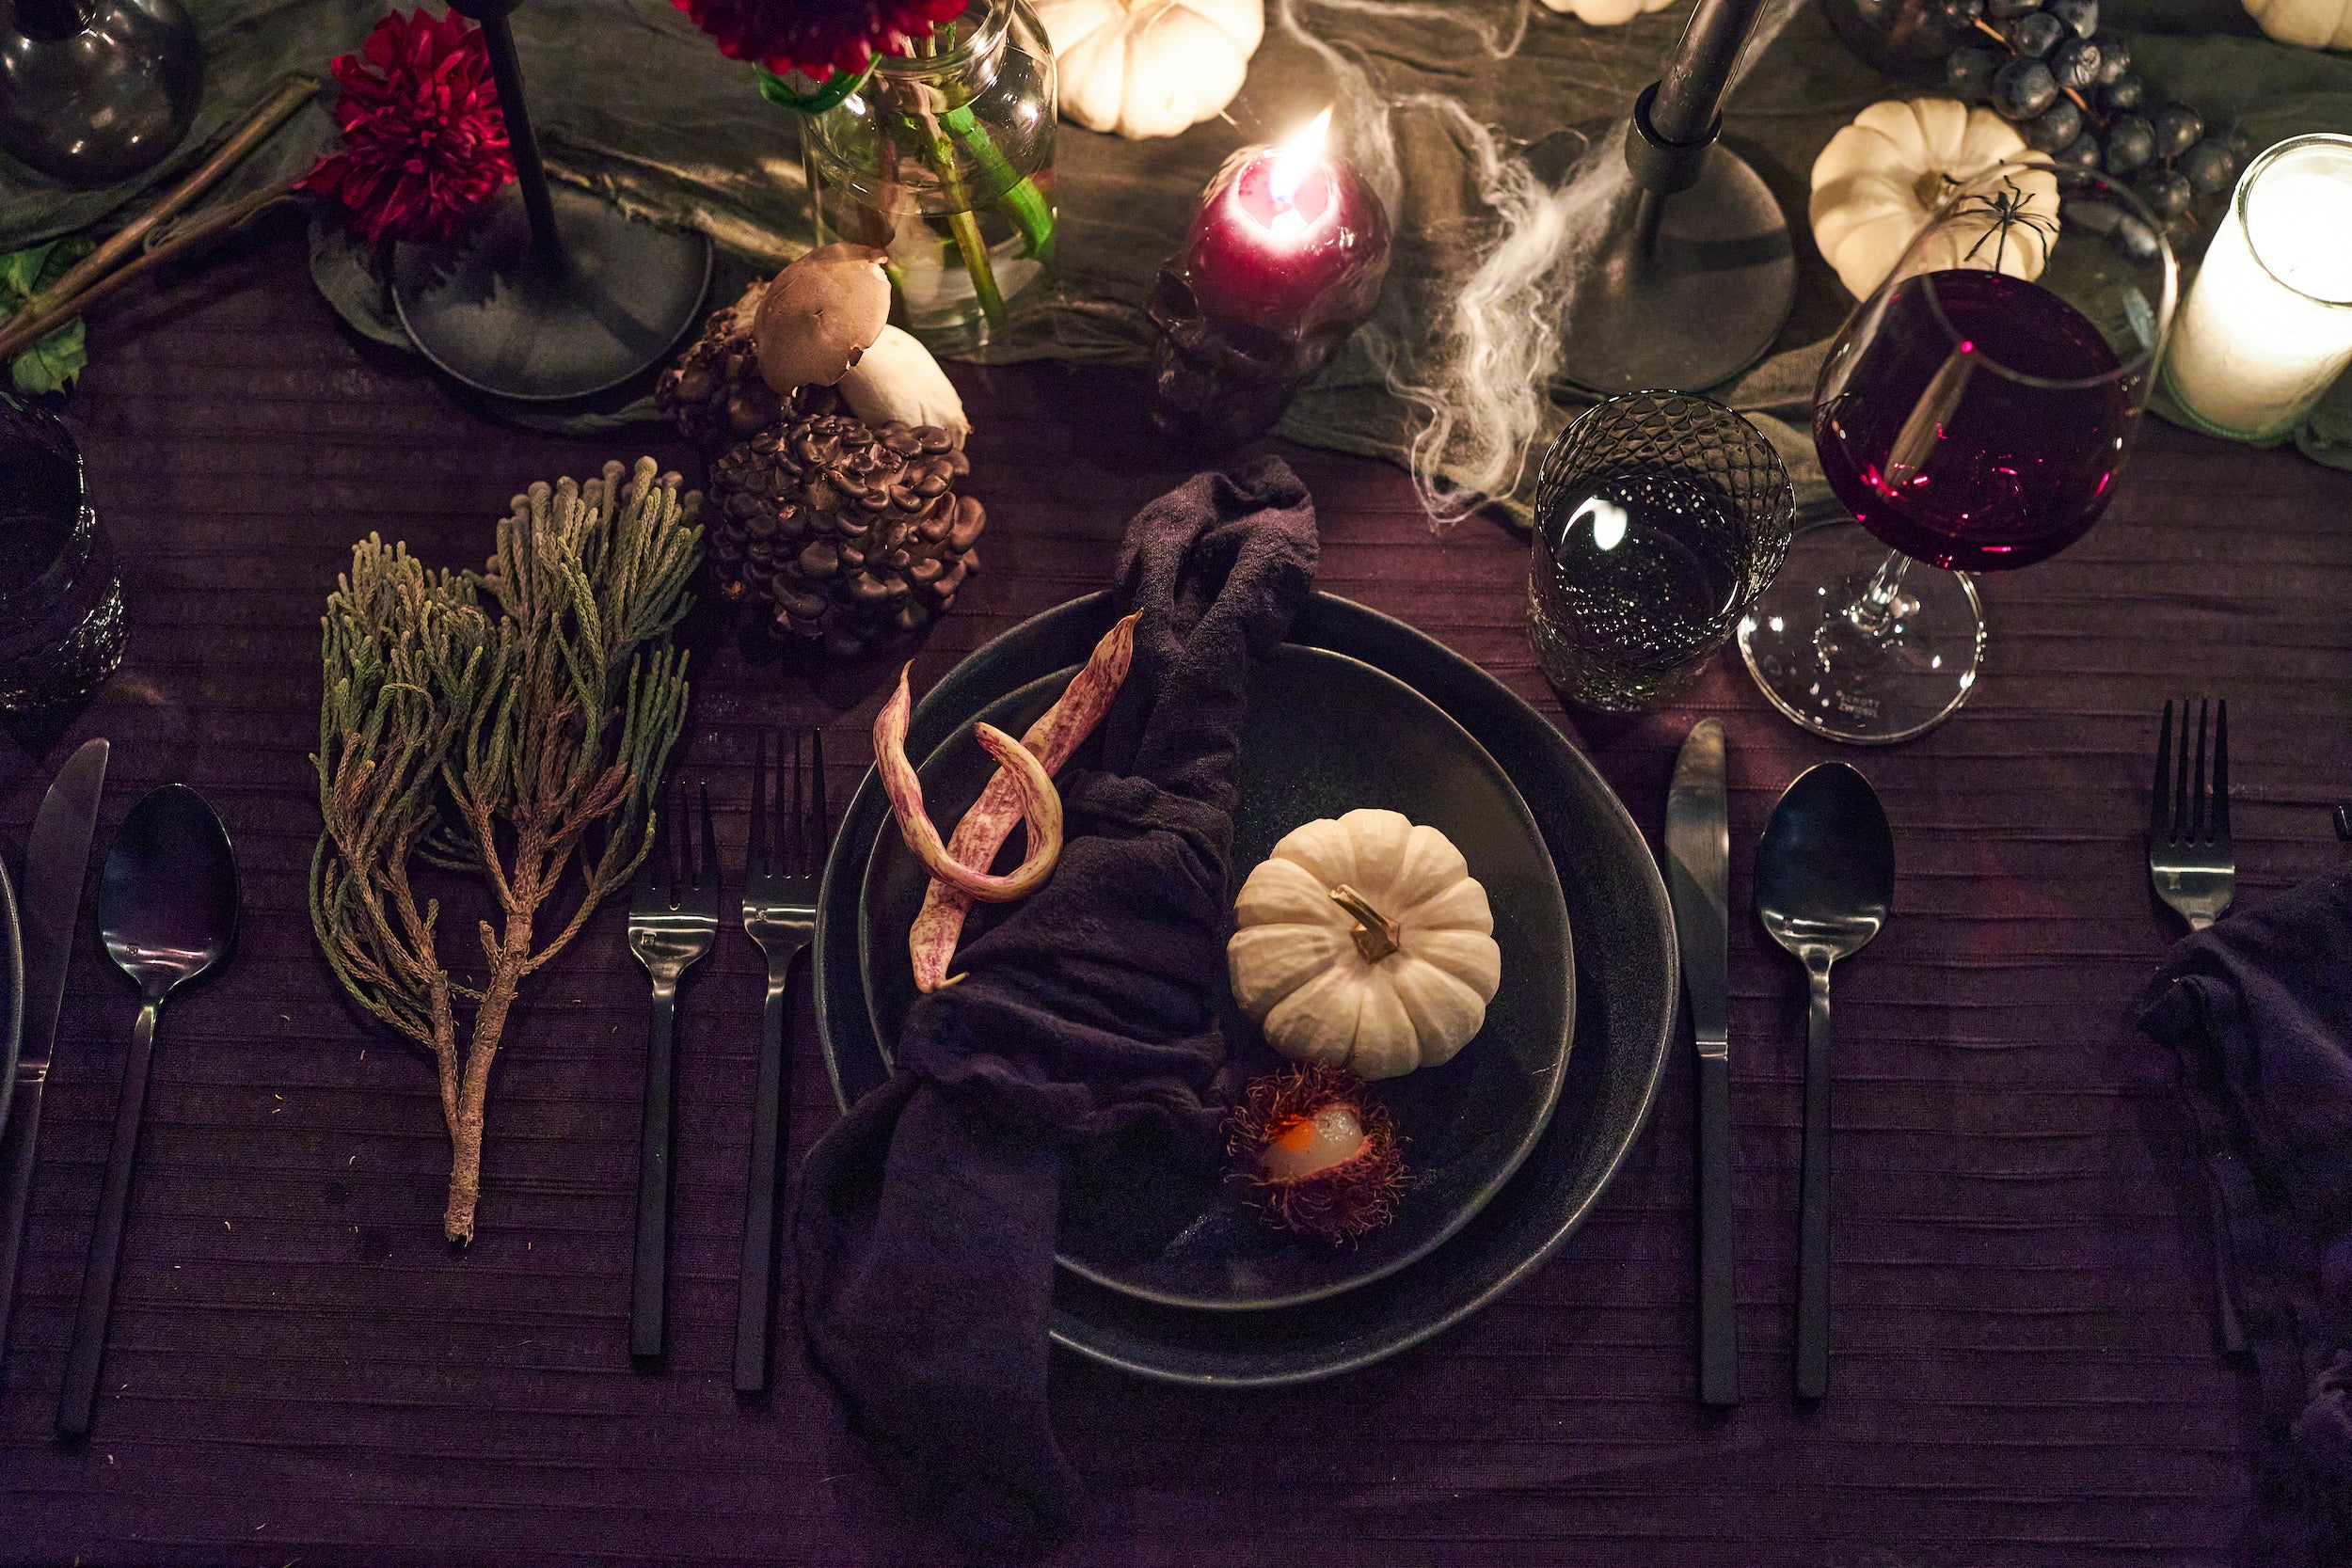 Halloween spooky dinner party inspiration